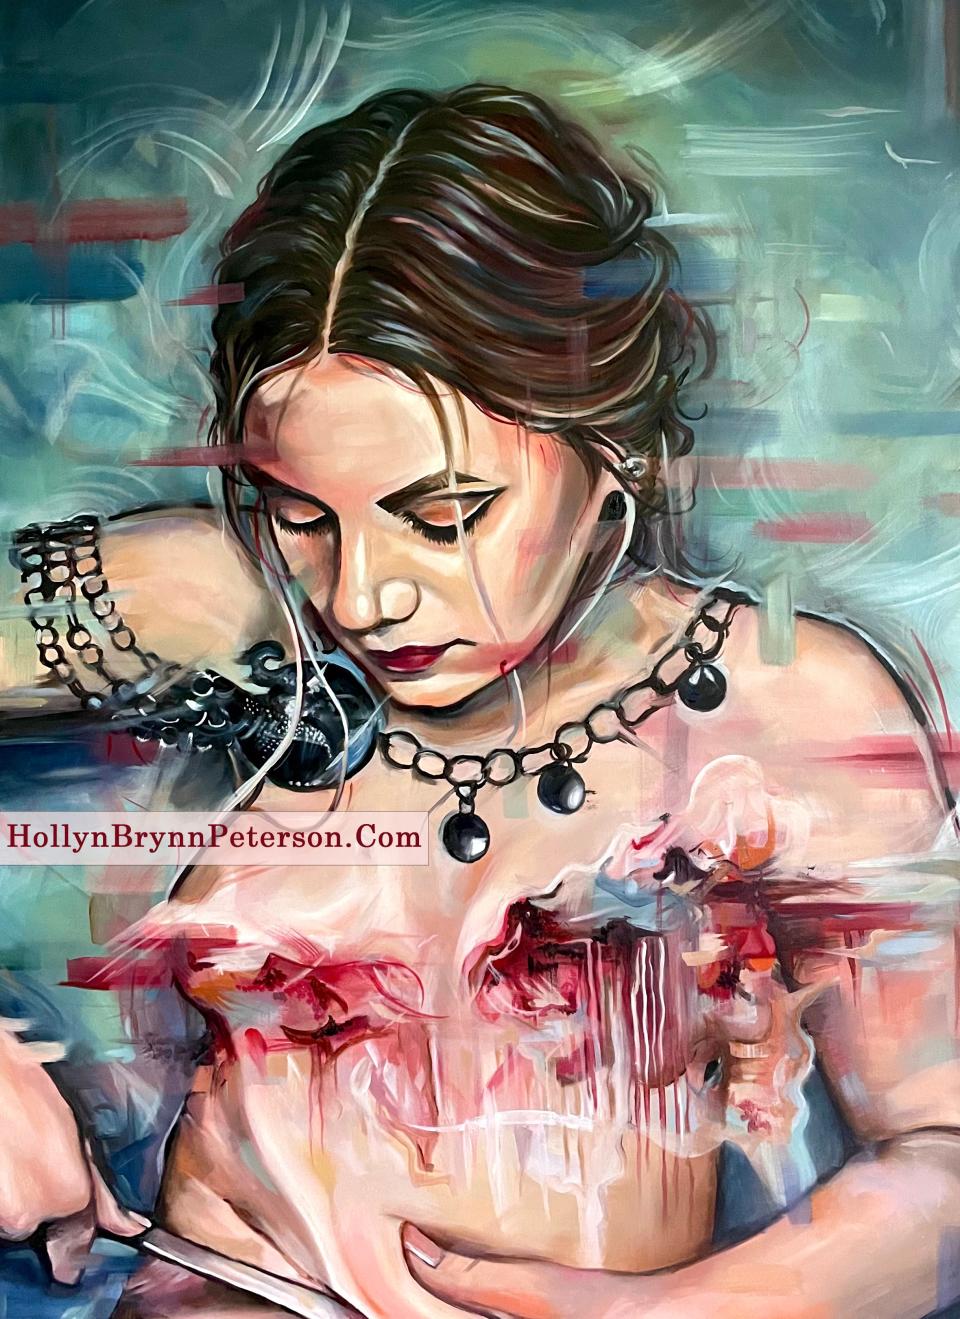 Hollyn Peterson painted “I Will Do It Myself” after years of chronic pain without receiving any relief and answers from medical professionals. Peterson beat cancer three times as a child and recently graduated from UW-Whitewater.